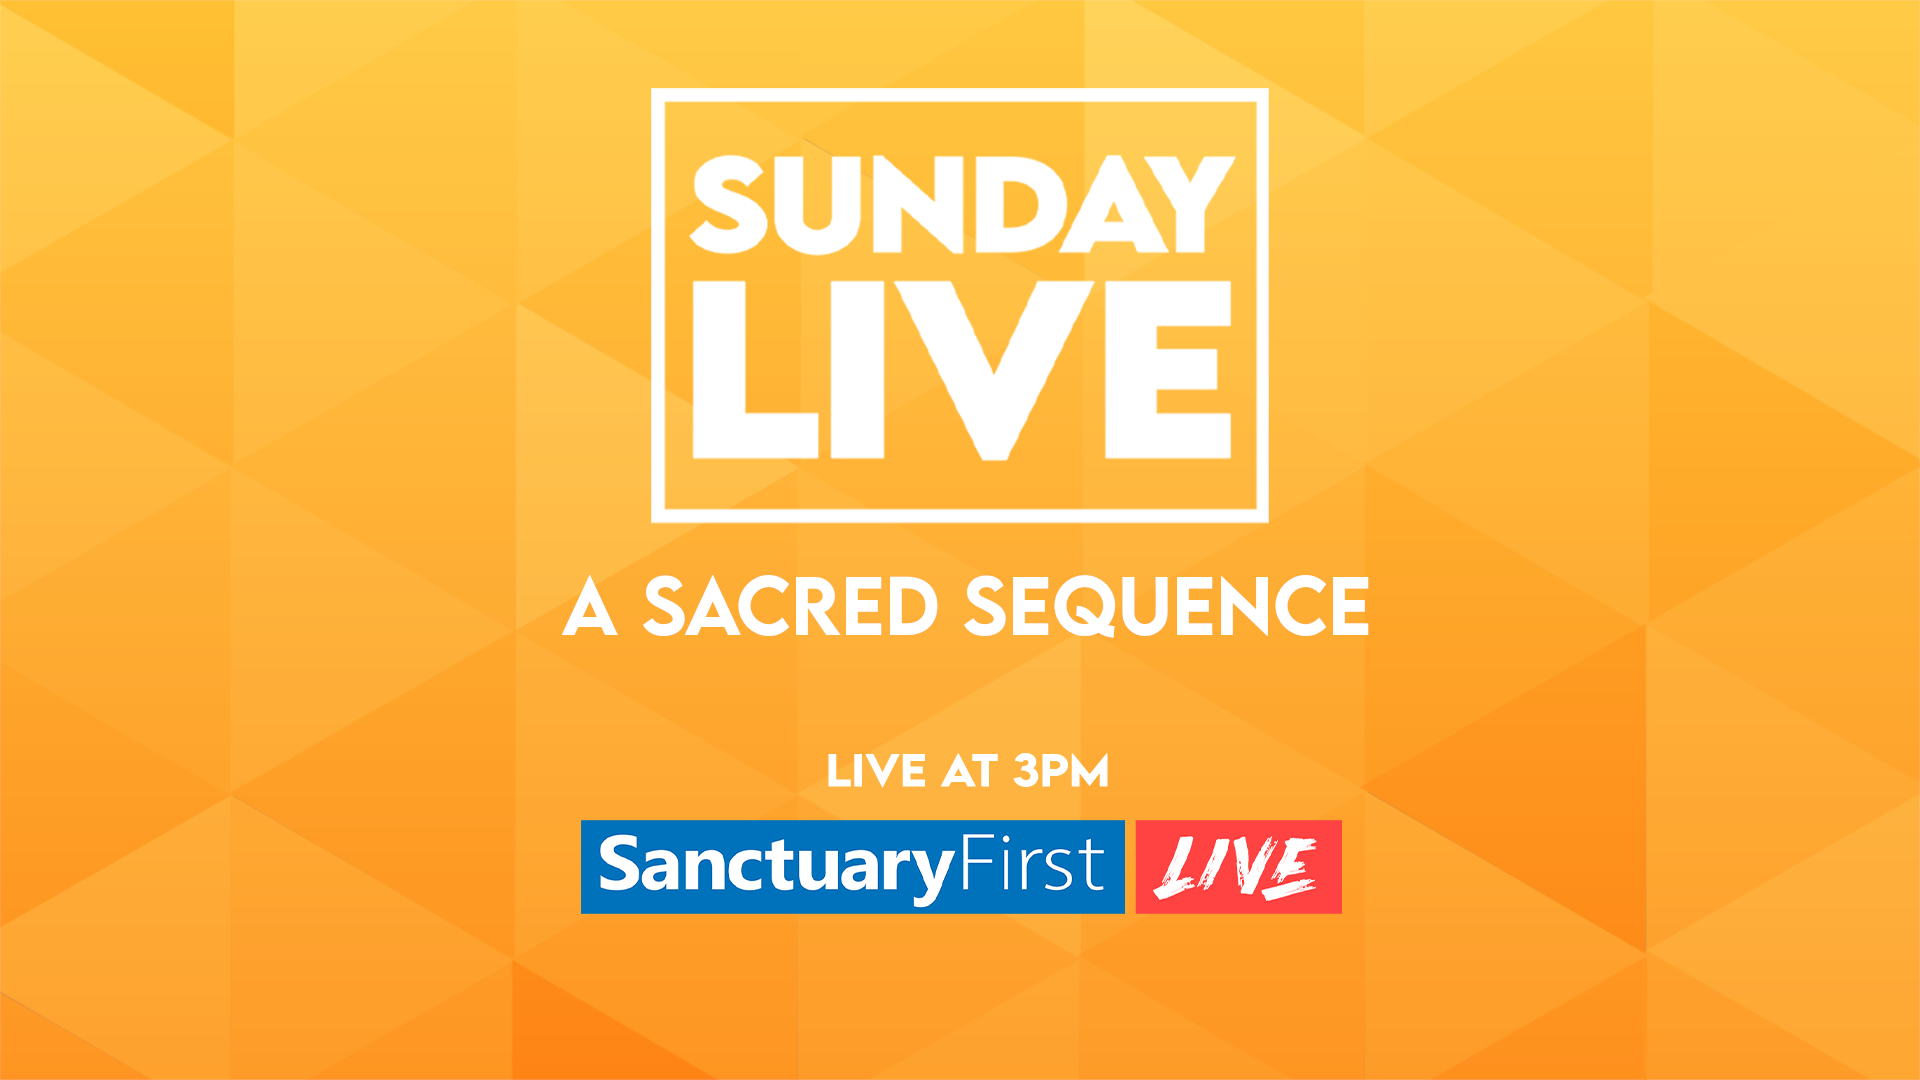 Sunday Live - A Sacred Sequence